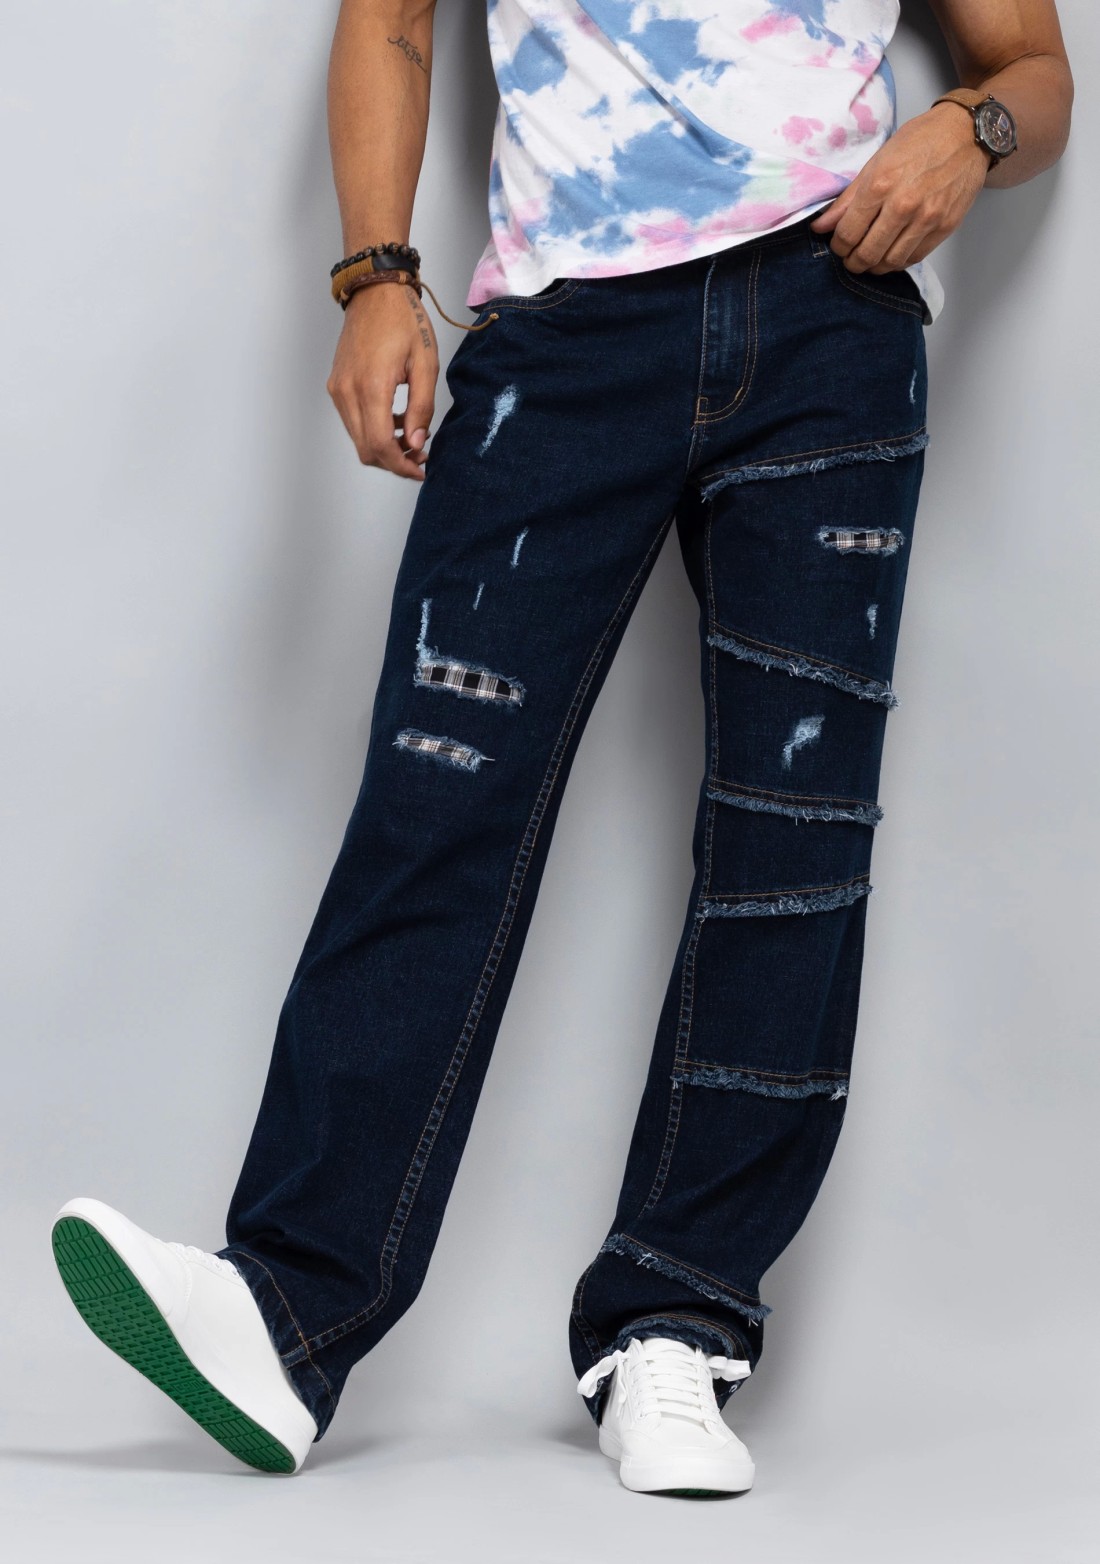 Rhysley Blue Cotton Ultra Fashion Men's Jeans - Buy Online in India @ Mehar